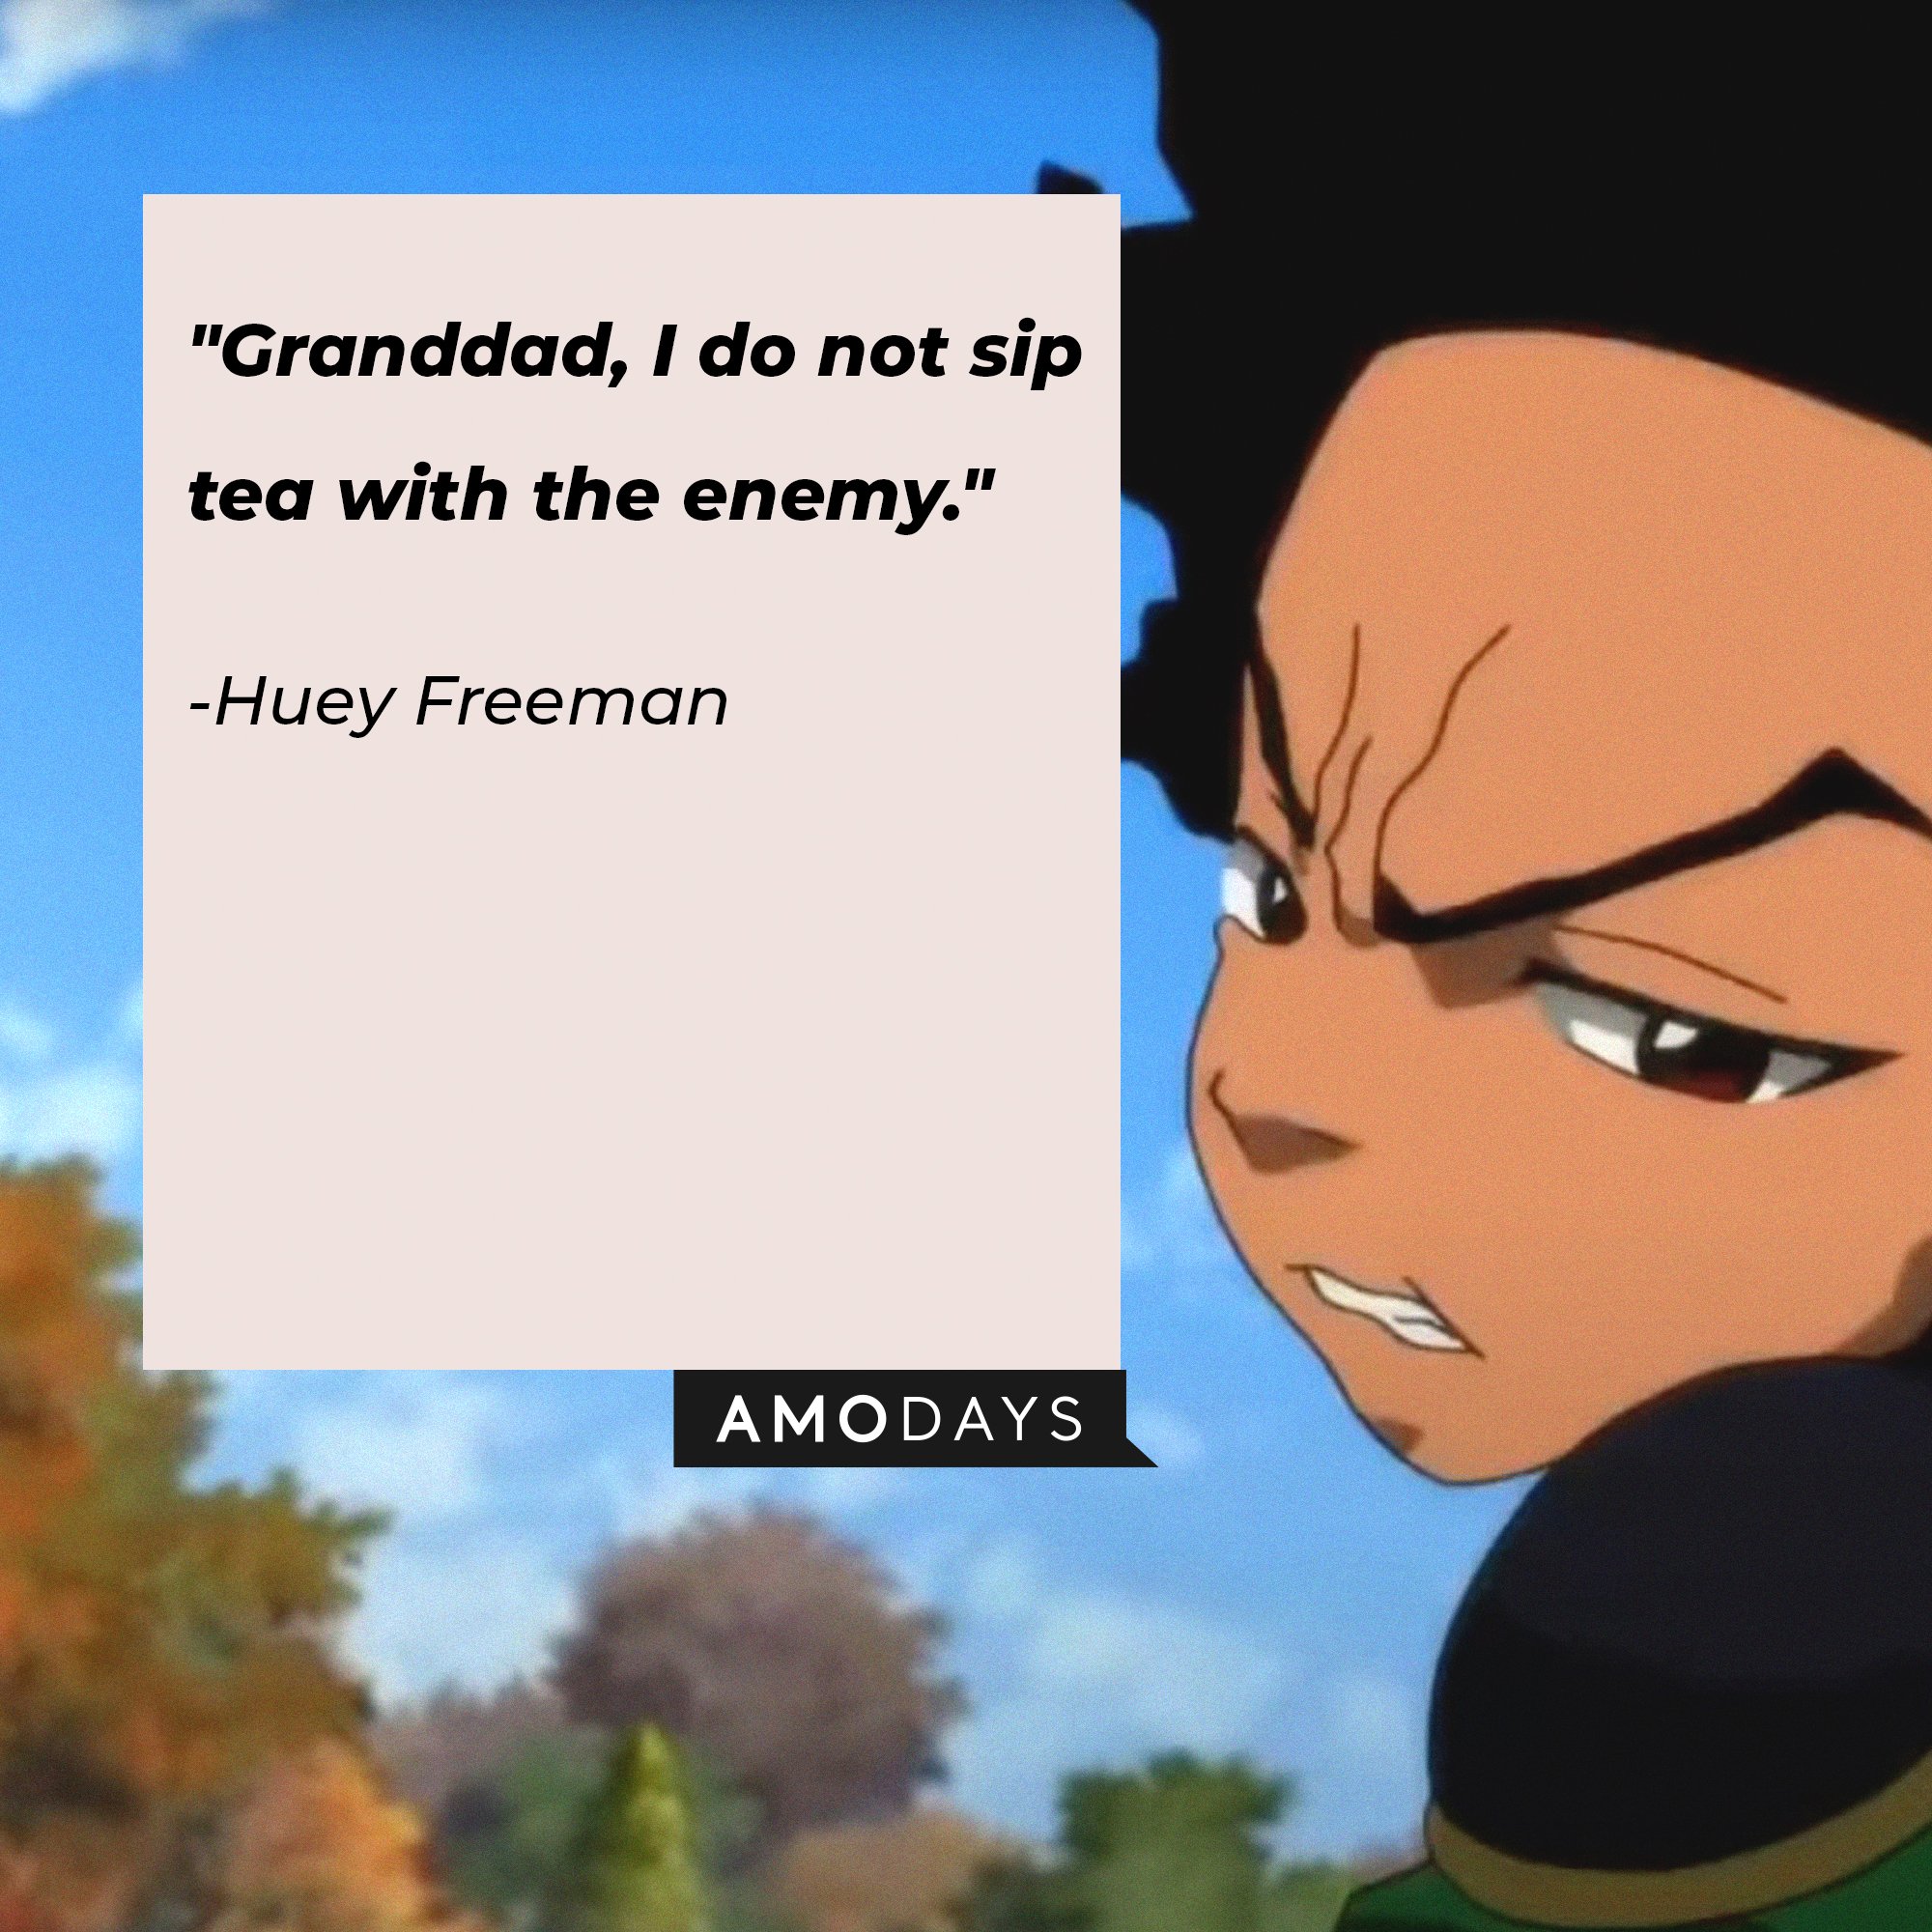 Huey Freeman's quote: "Granddad, I do not sip tea with the enemy." | Image: AmoDays